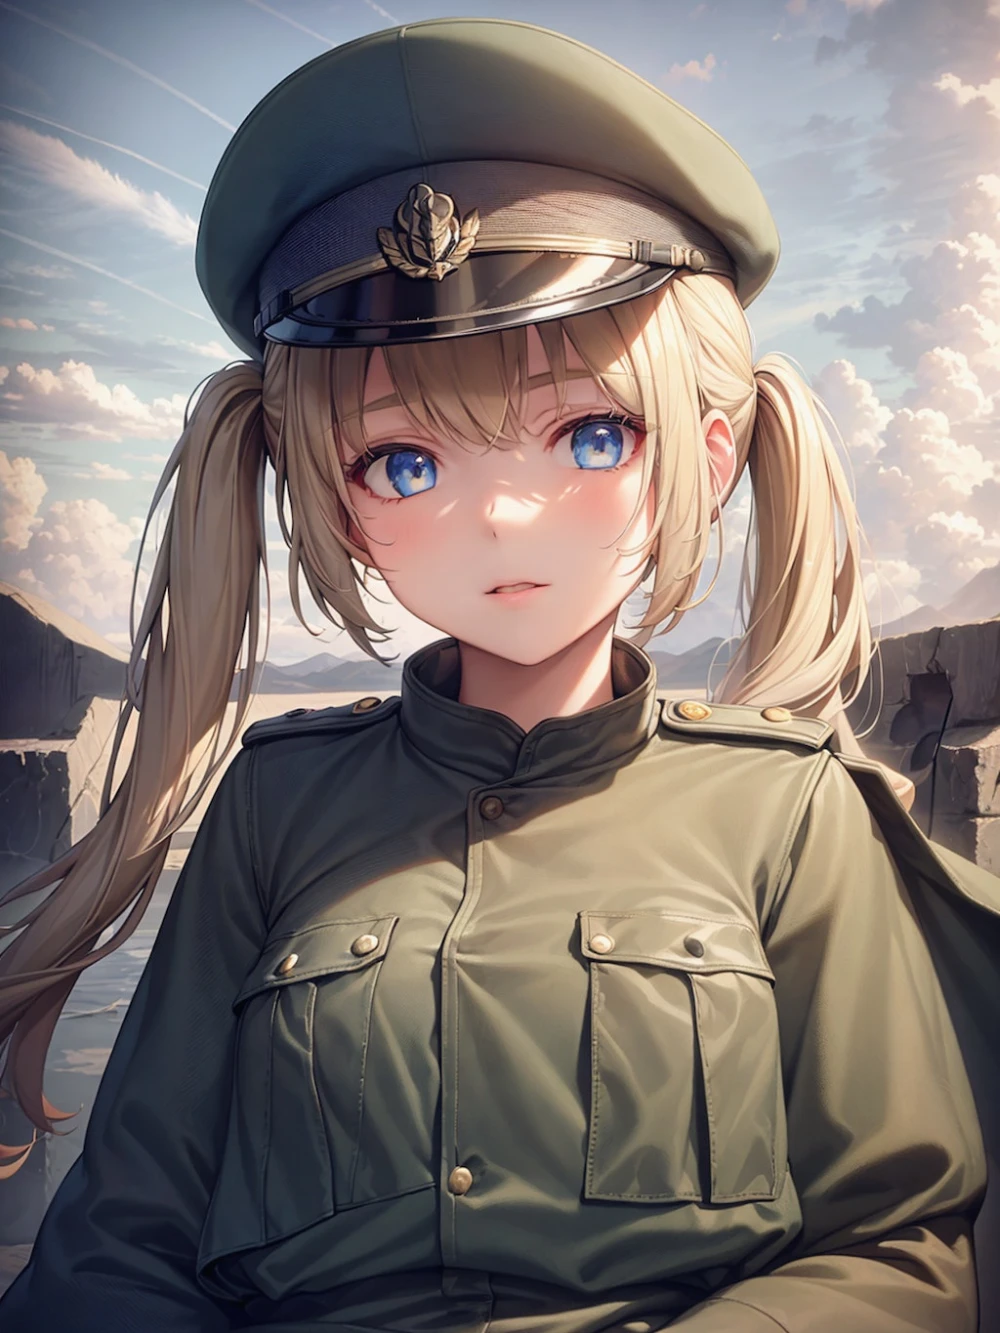 military-uniform-anime-style-all-ages-8